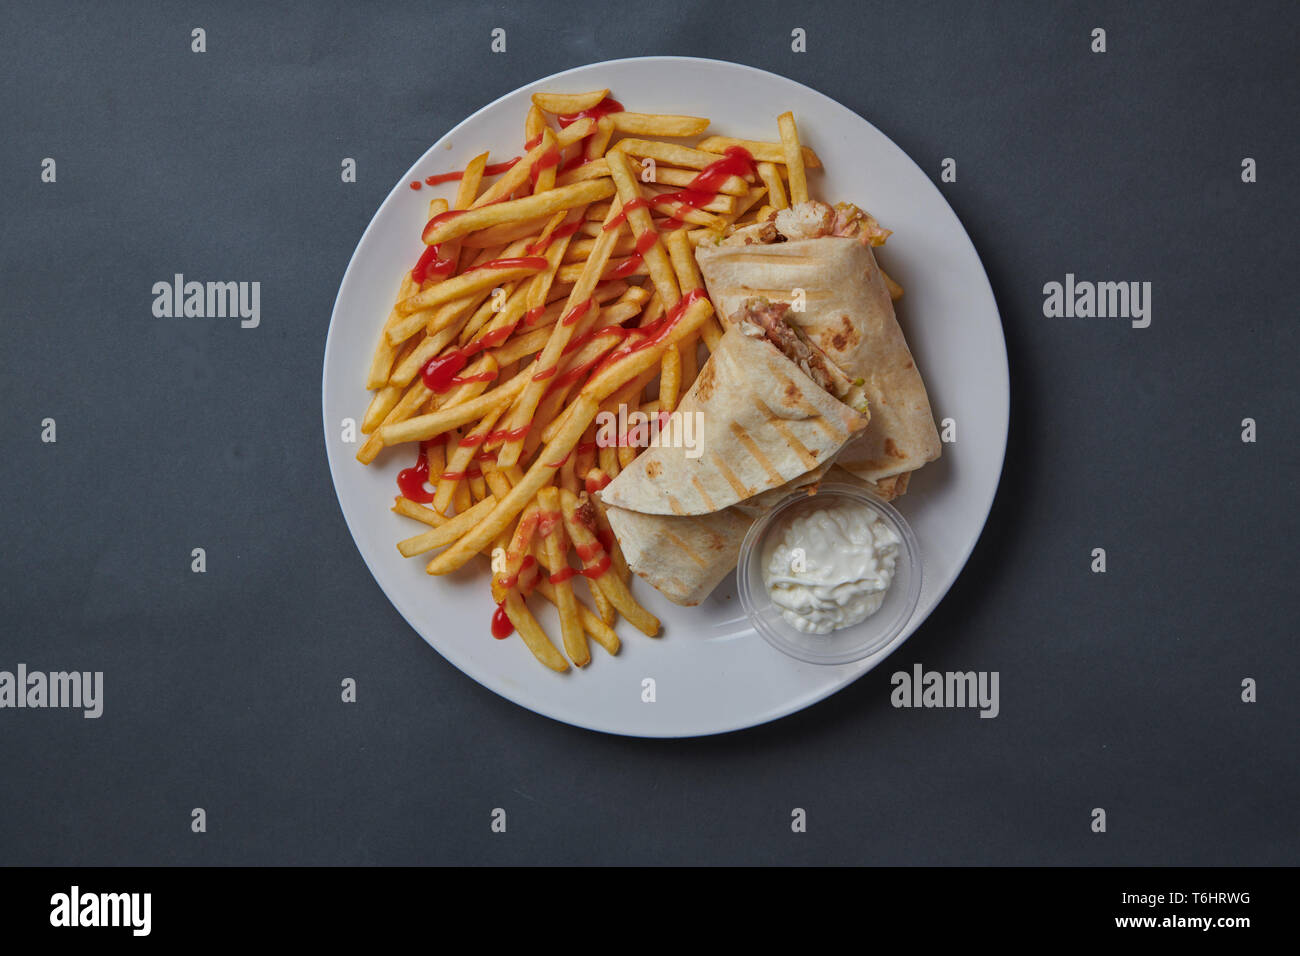 Chicken Kebab and chips on a grey background Stock Photo